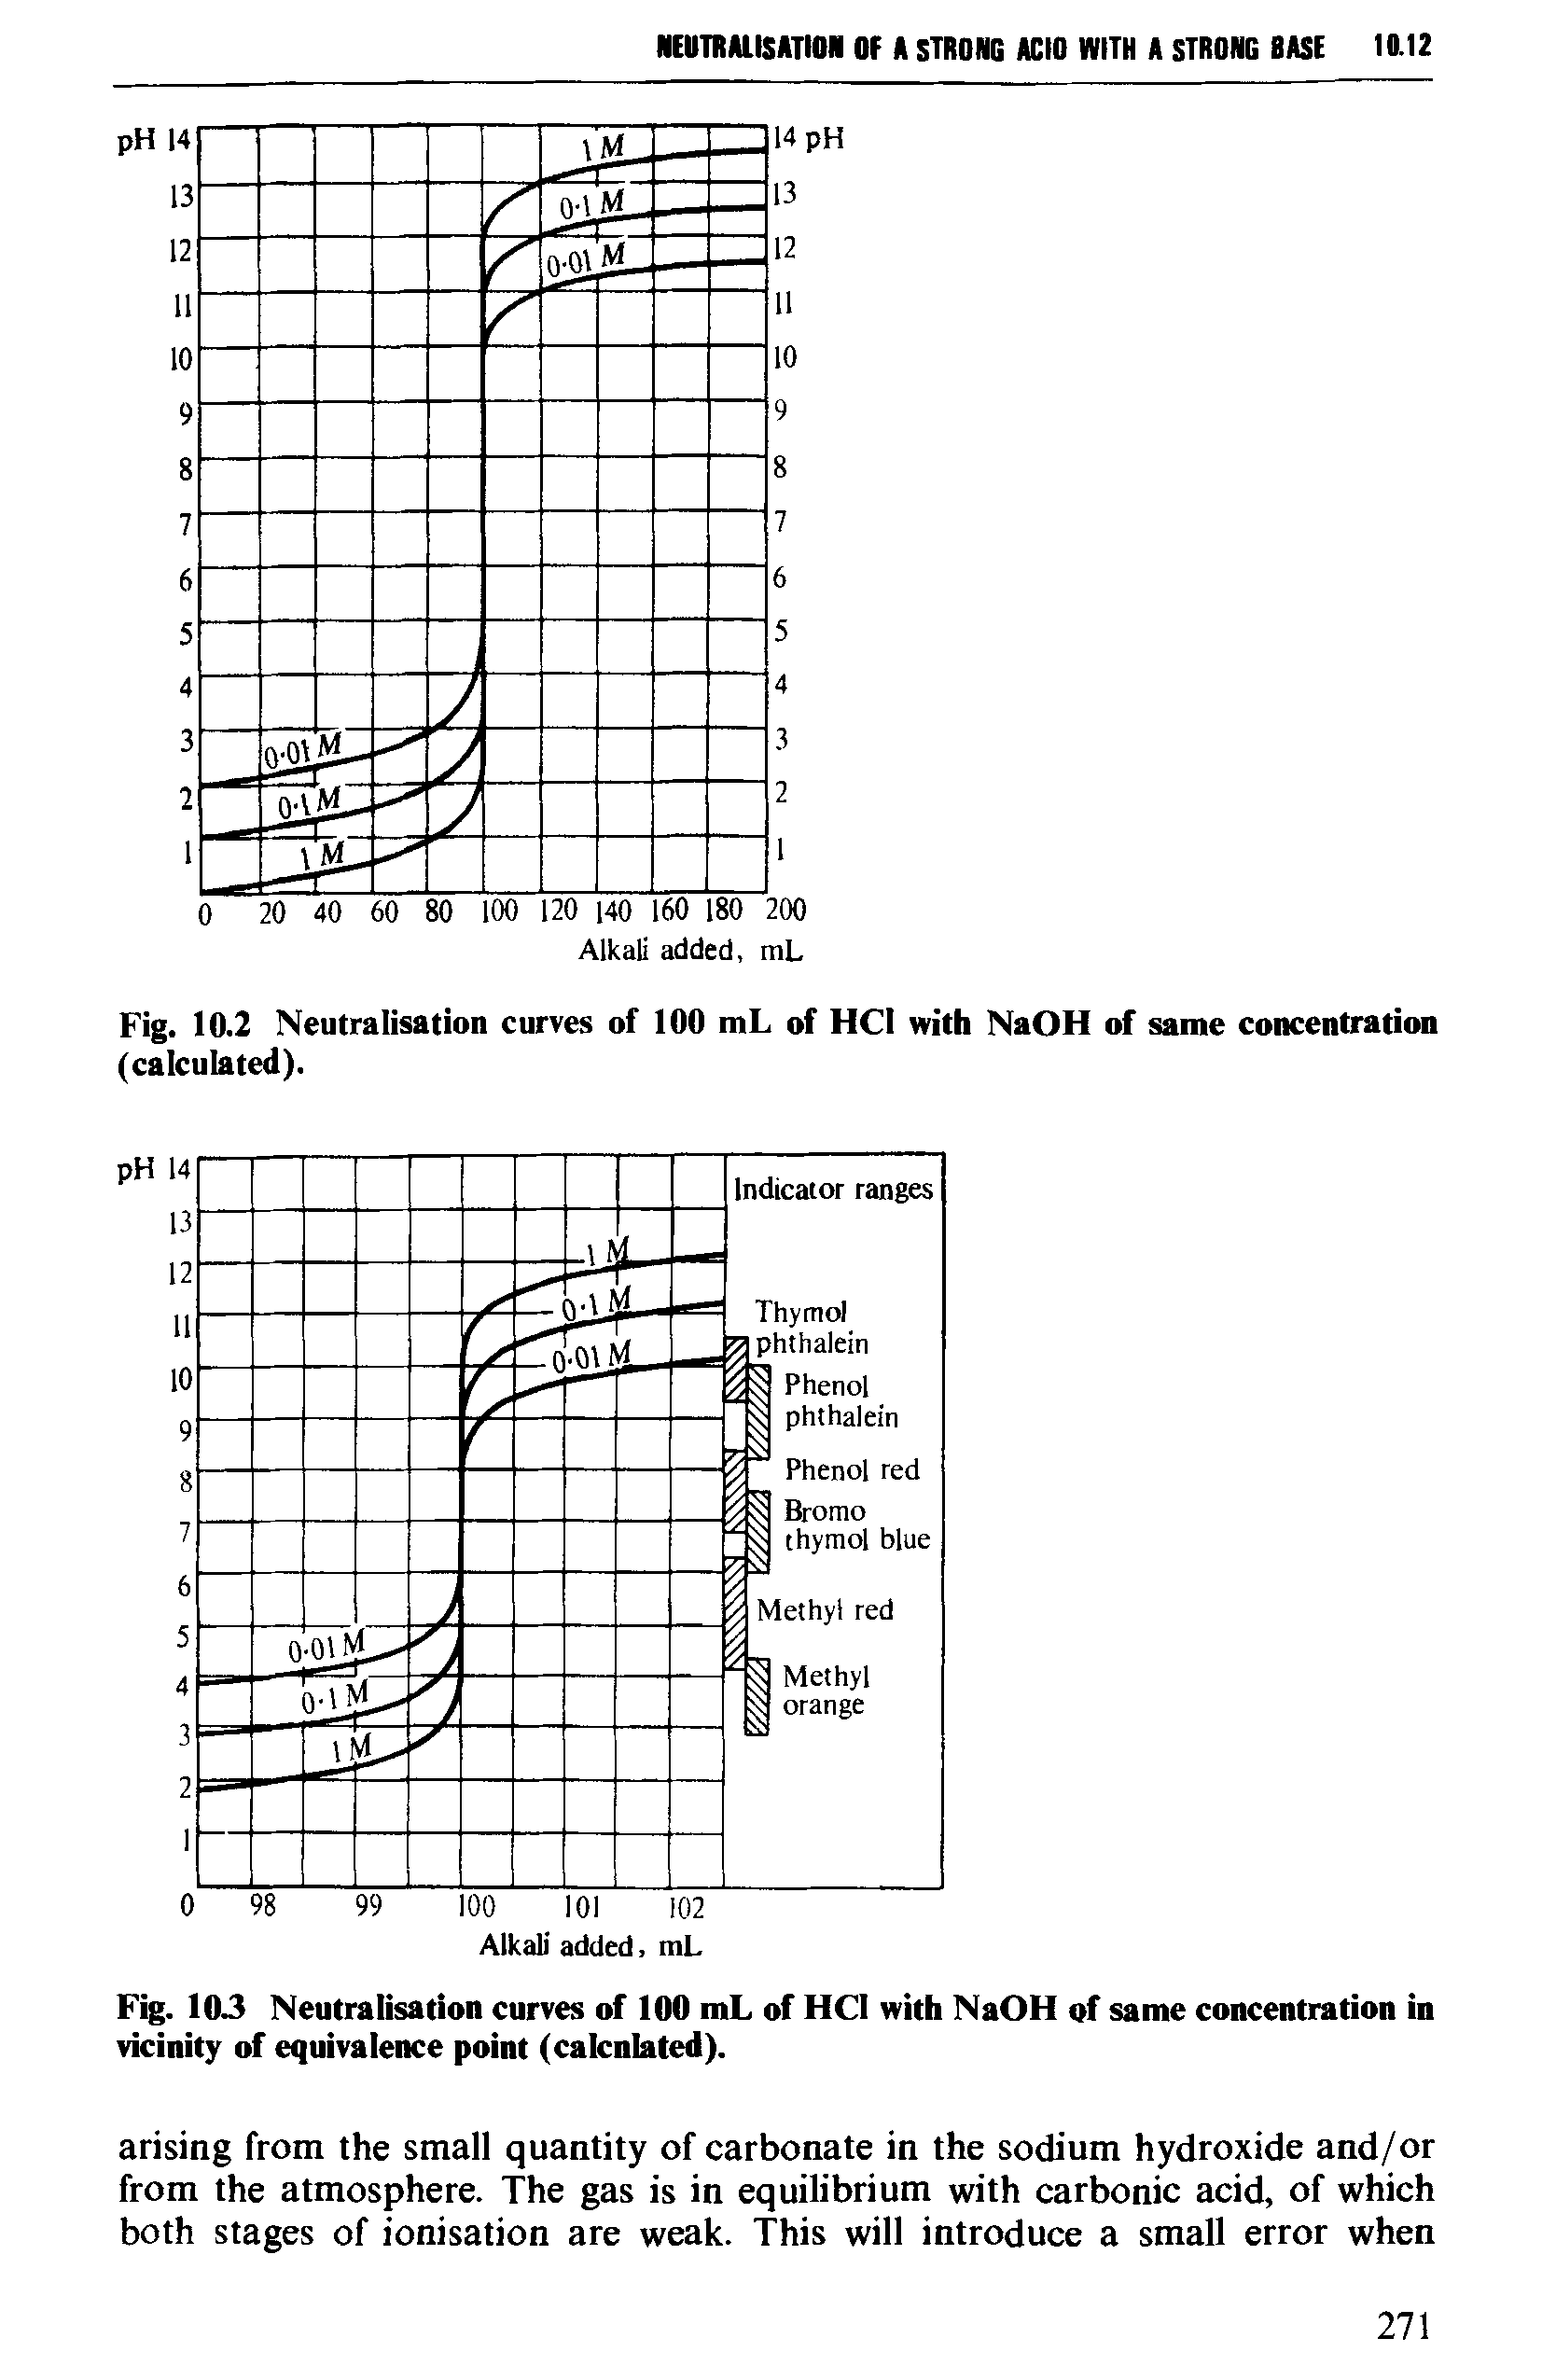 Fig. 10.2 Neutralisation curves of 100 mL of HCI with NaOH of same concentration (calculated).